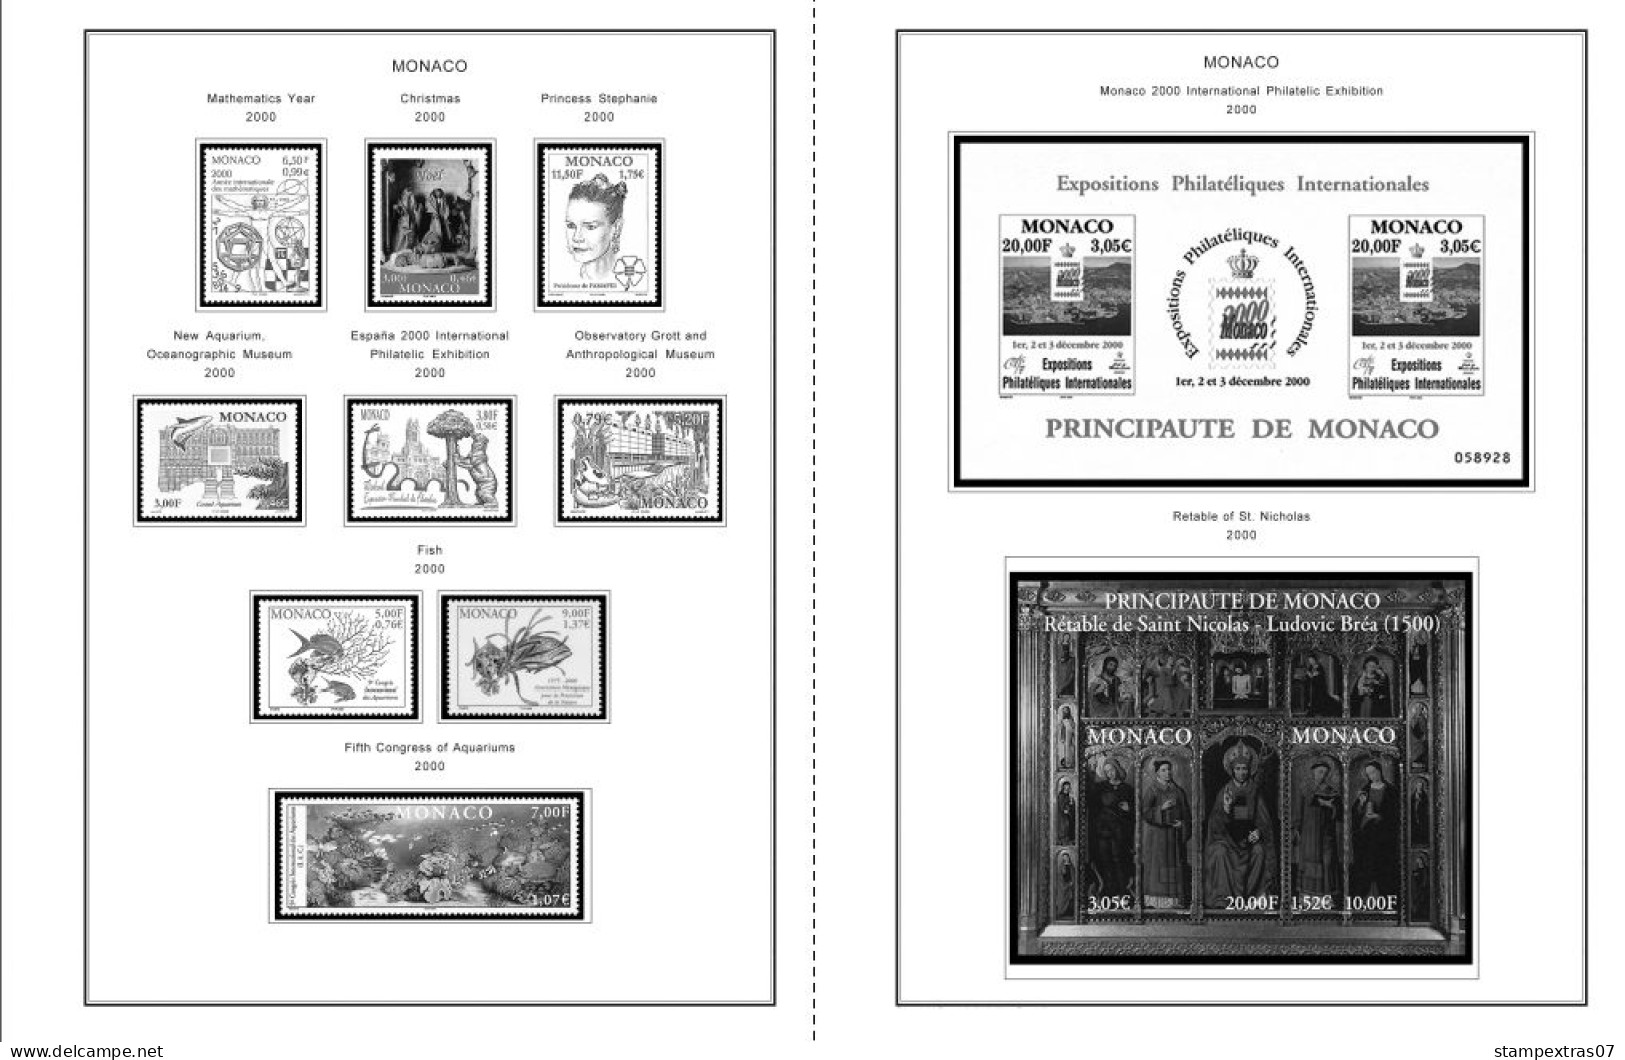 MONACO 1855-2010 + 2011-2020 STAMP ALBUM PAGES (409 B&w Illustrated Pages) - Inglés